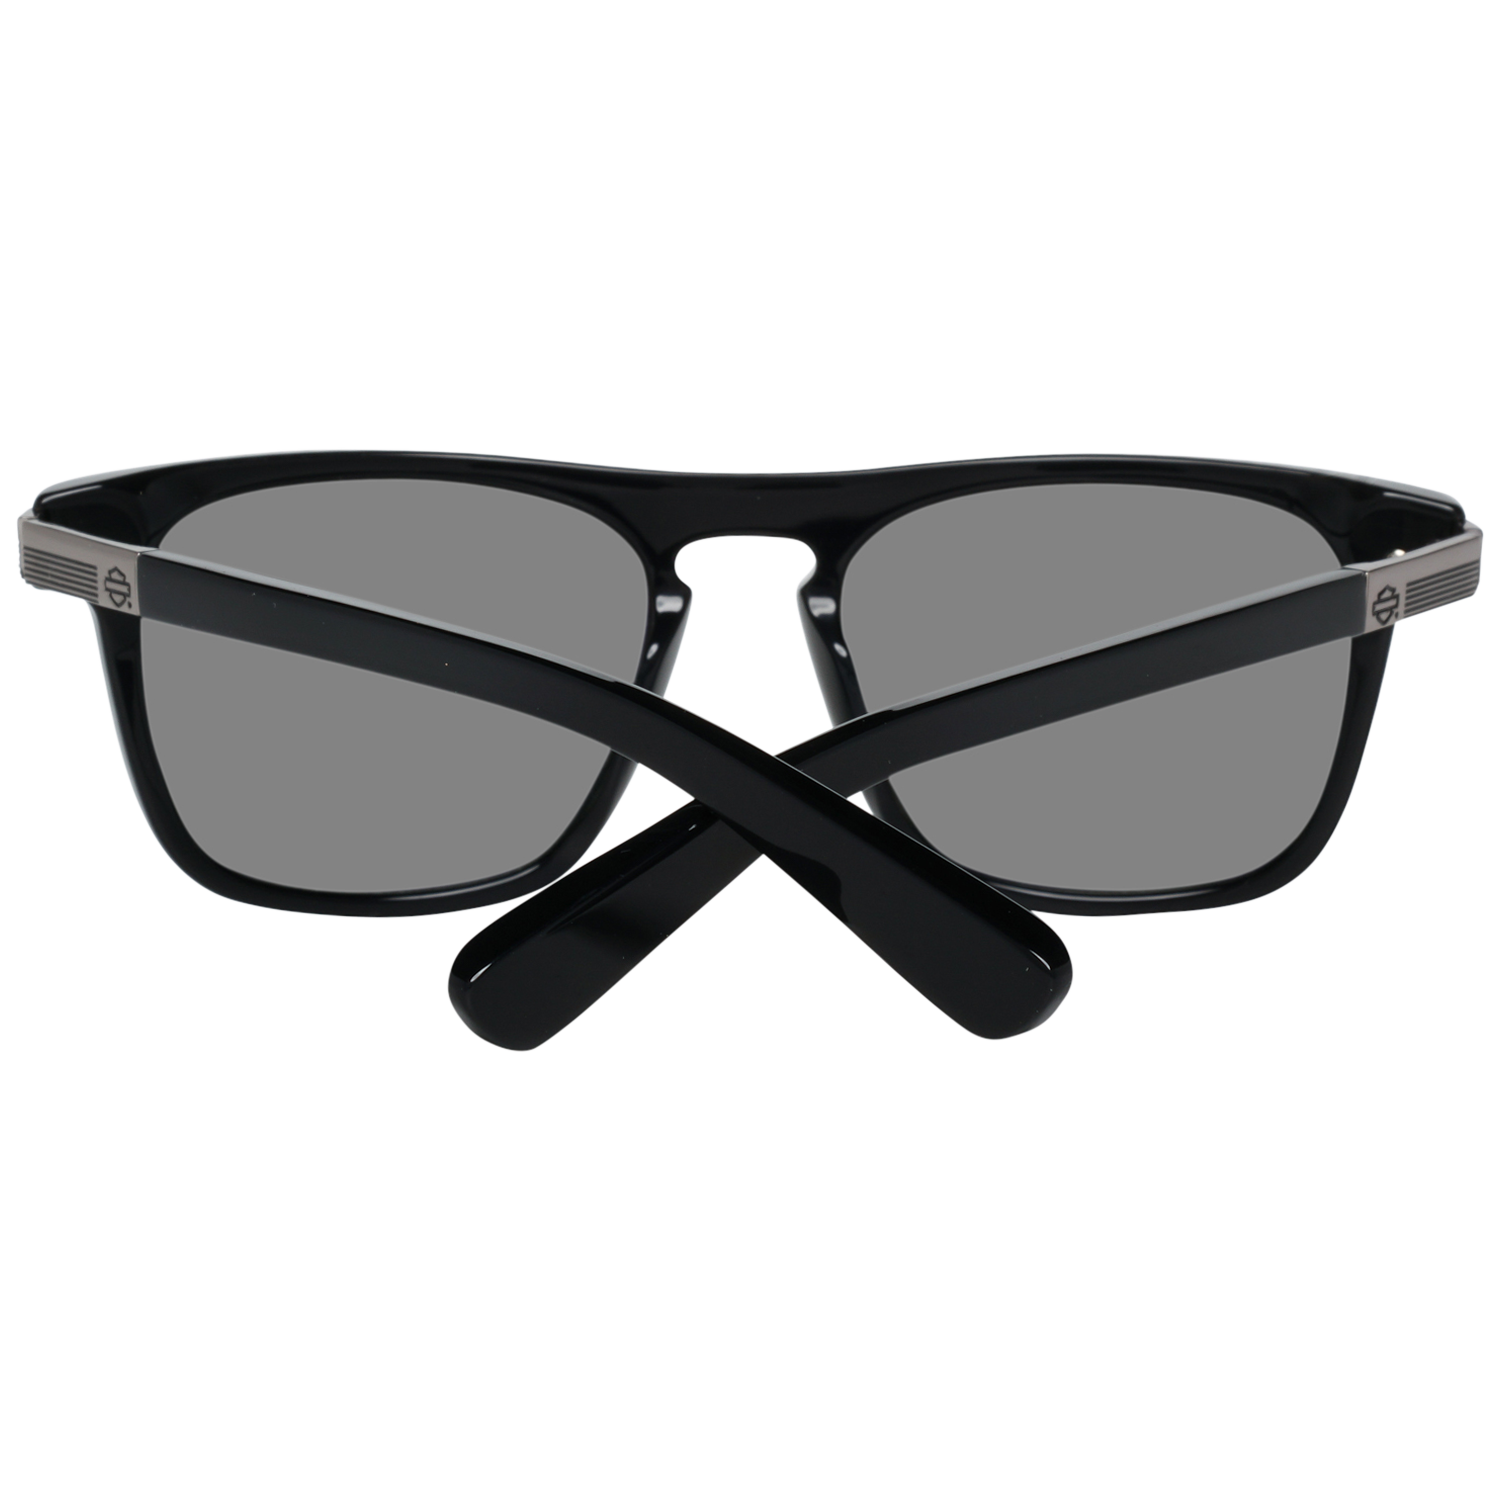 Harley-Davidson Sunglasses HD2037 01C 53 Men
Frame color: Black
Lenses color: Grey
Lenses material: Plastic
Filter category: 3
Style: Trapezium
Lenses effect: Mirrored
Protection: 100% UVA & UVB
Size: 53-18-145
Lenses width: 53
Lenses height: 42
Bridge width: 18
Frame width: 145
Temples length: 145
Shipment includes: Case, cleaning cloth
Spring hinge: No